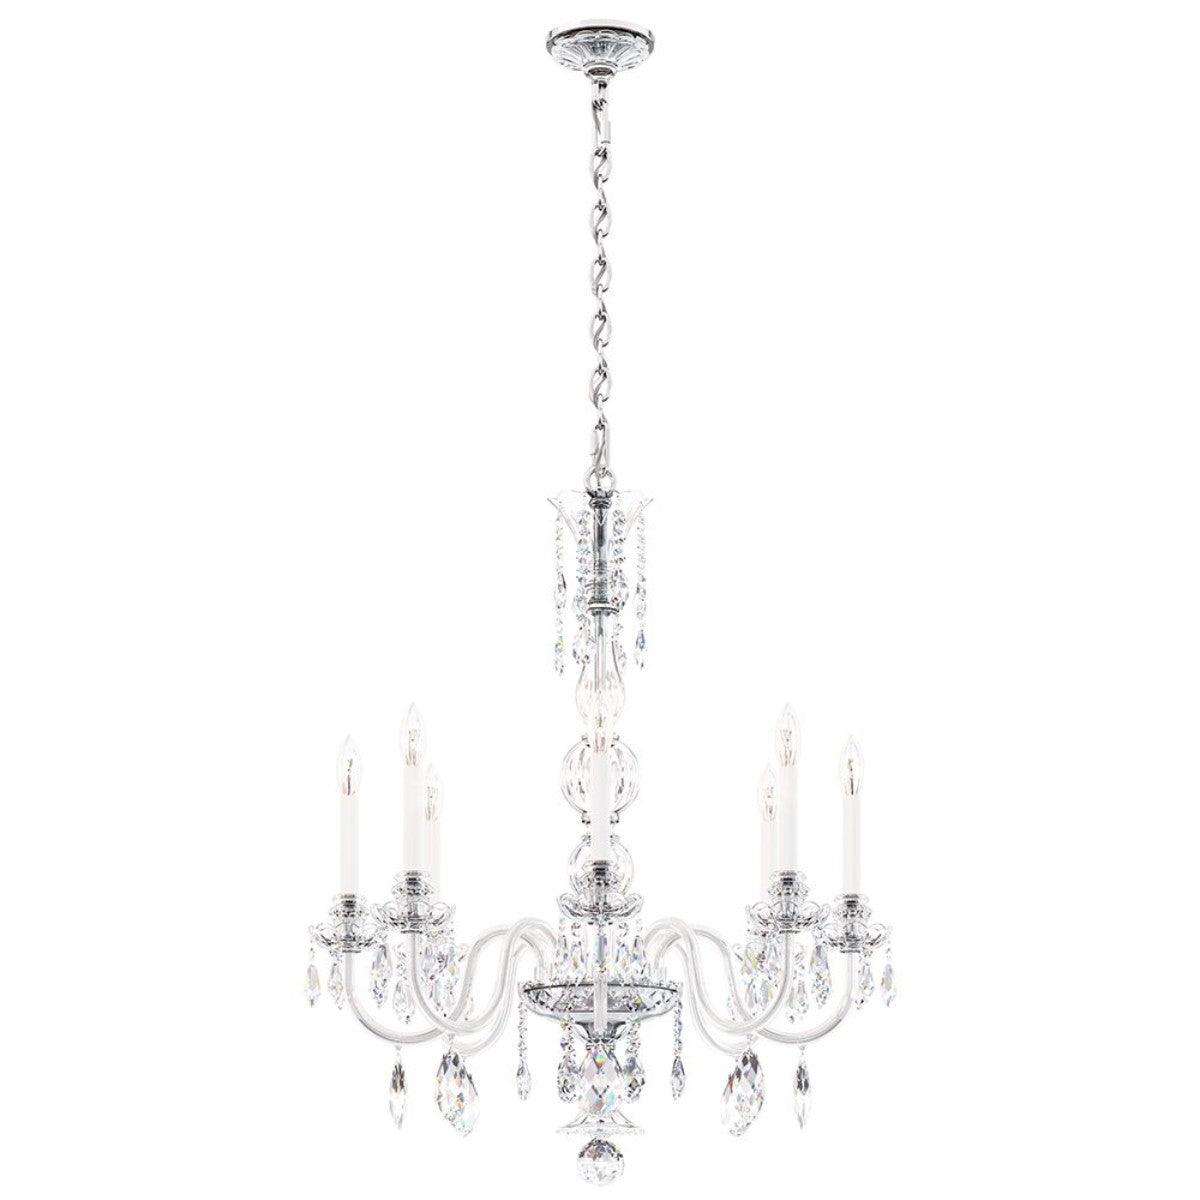 Hamilton Nouveau 8 Light Silver Chandelier with Clear Heritage Crystals